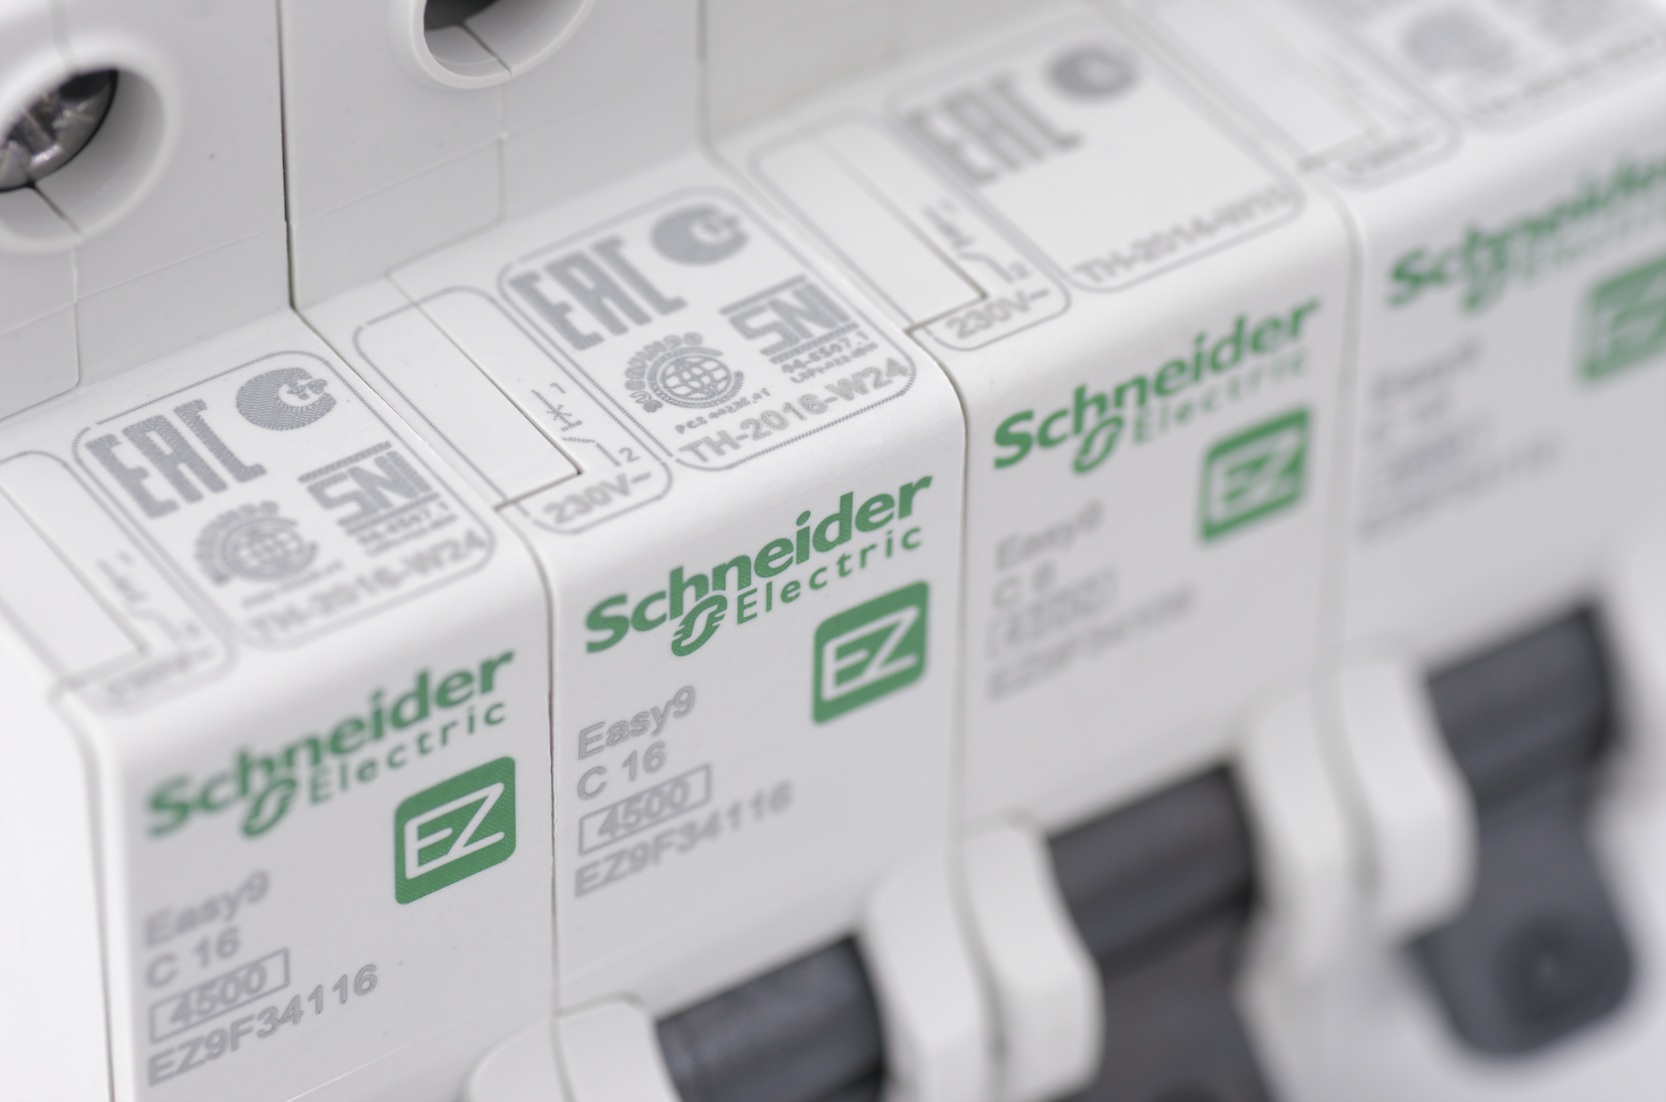 Schneider Electric Plows HUF 5.3 bln Into Hungarian Plant